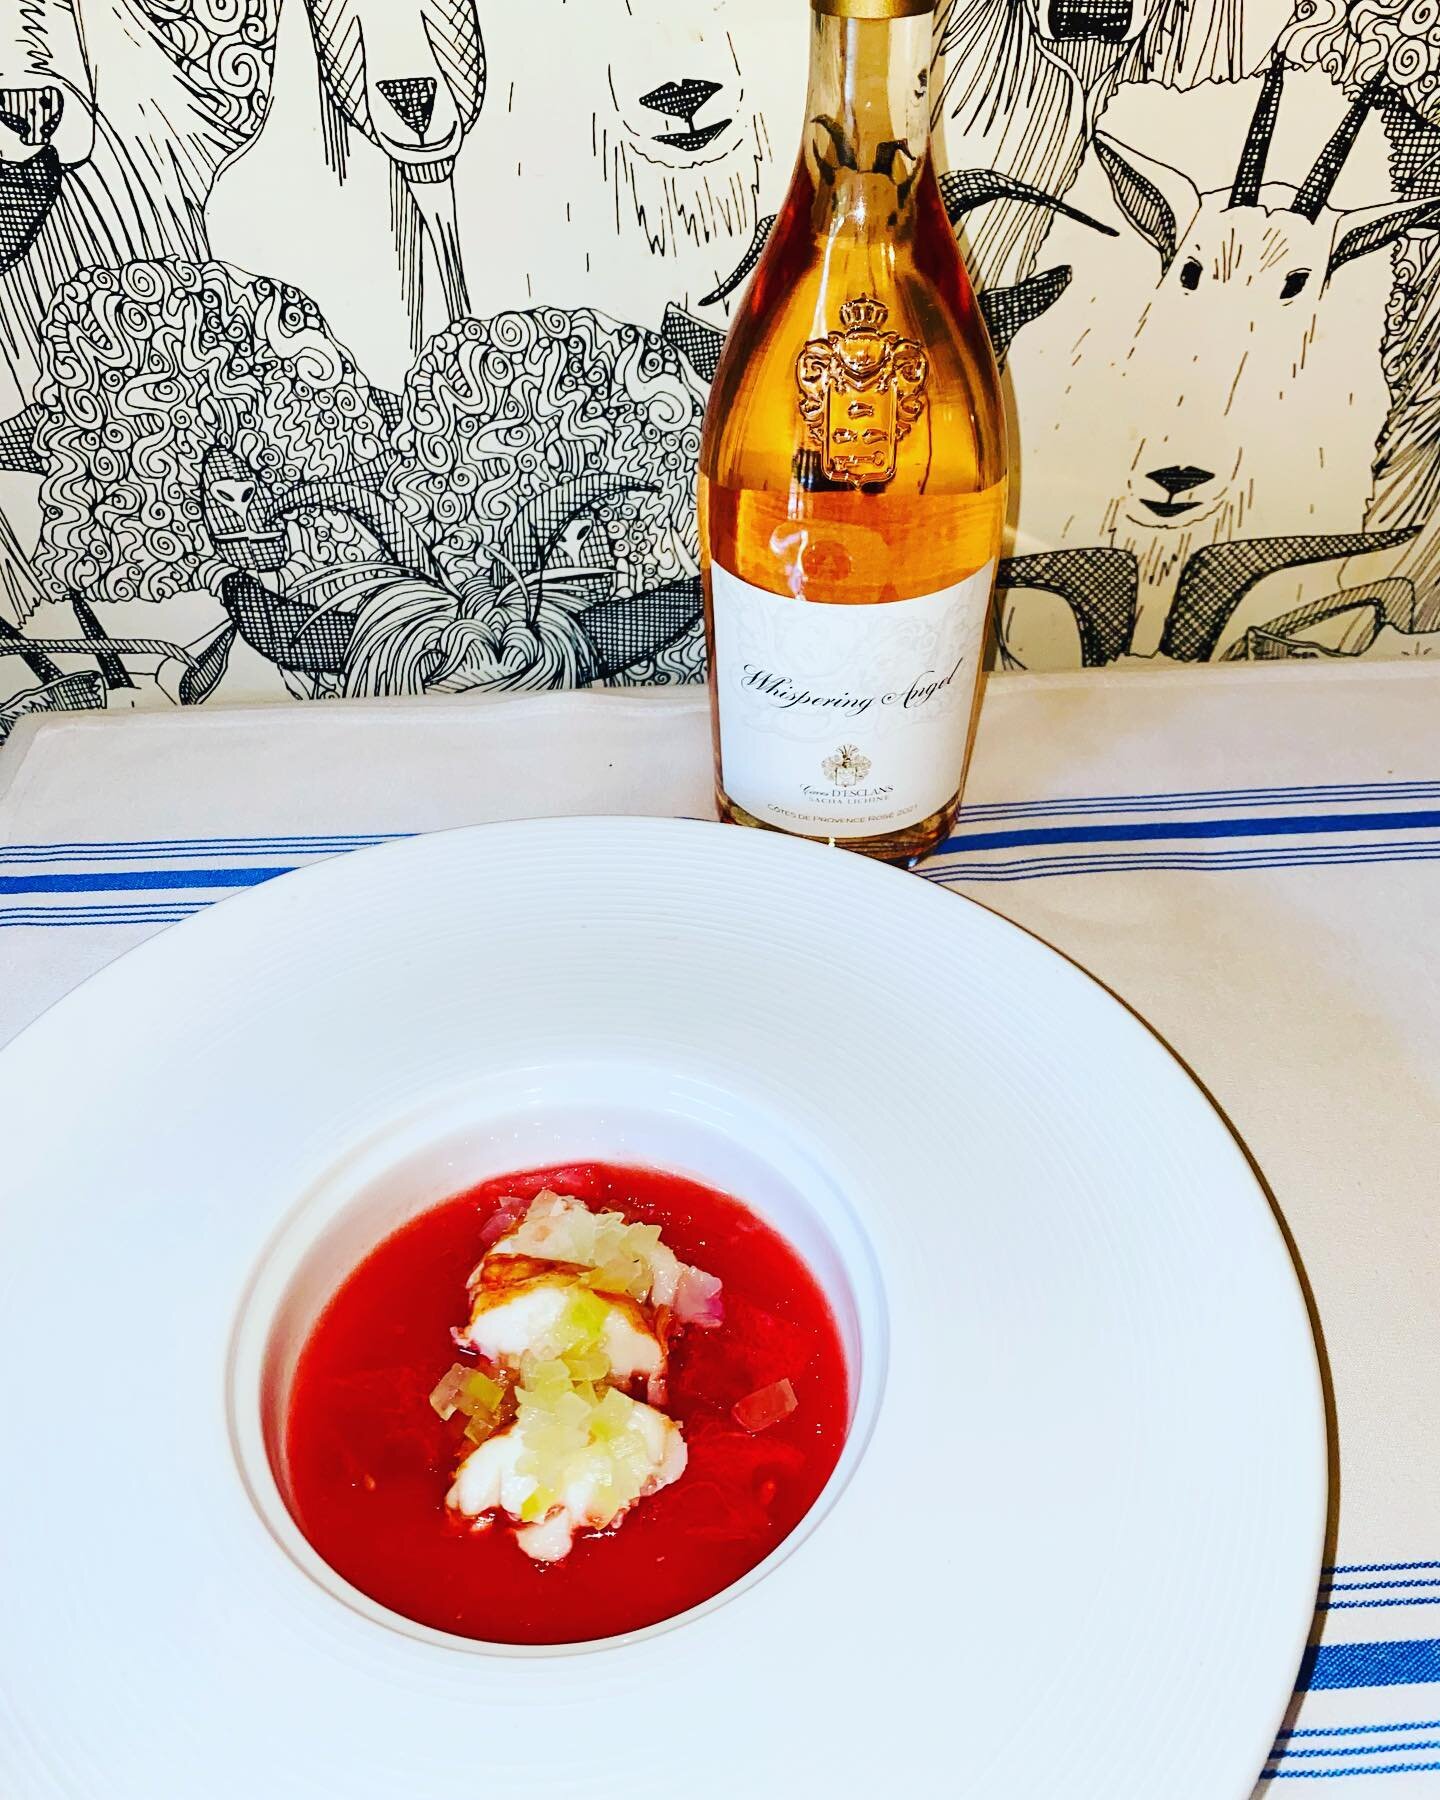 Our First Course is Watermelon Gazpacho with spiny lobster and lime paired with Whispering Angel Rose, Cotes de Provence, 2020 #thefrenchgoat #lewisburgwv #bonappalachia #simplygbv 
#bistrolife @moethennessy